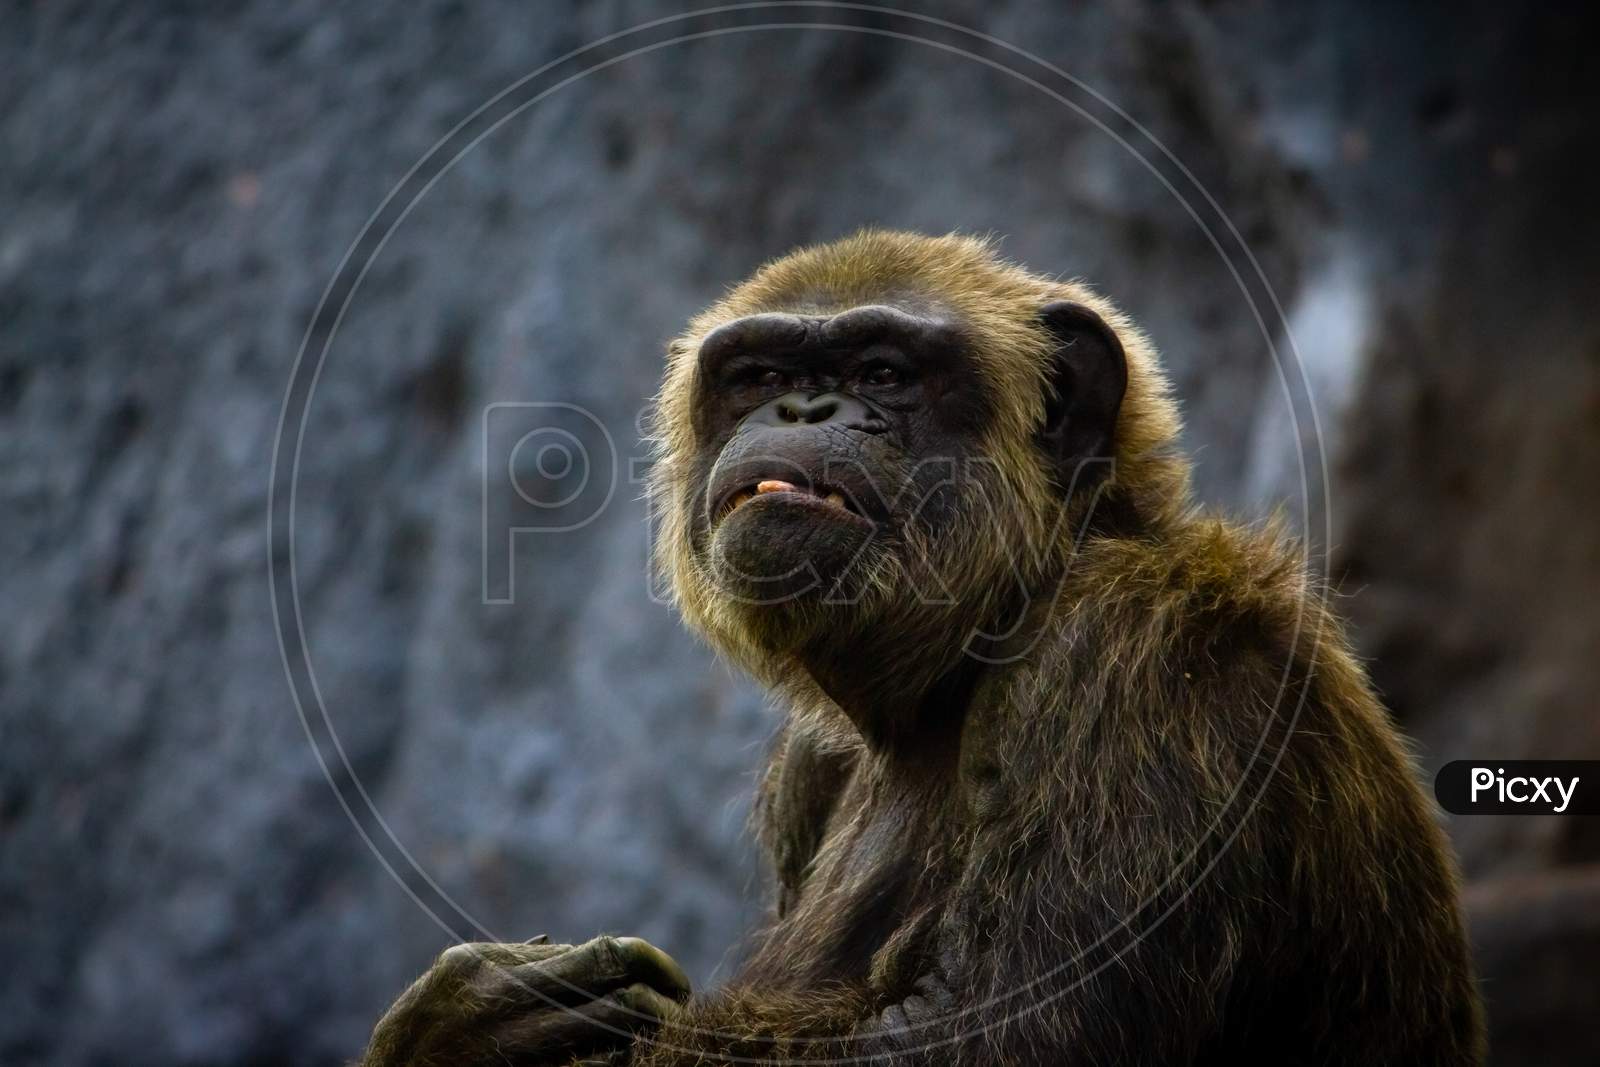 Young gigantic male Chimpanzee sleeping and relaxing on a tree in habitat forest jungle. Chimpanzee in close up view with thoughtful expression. Monkey & Apes family